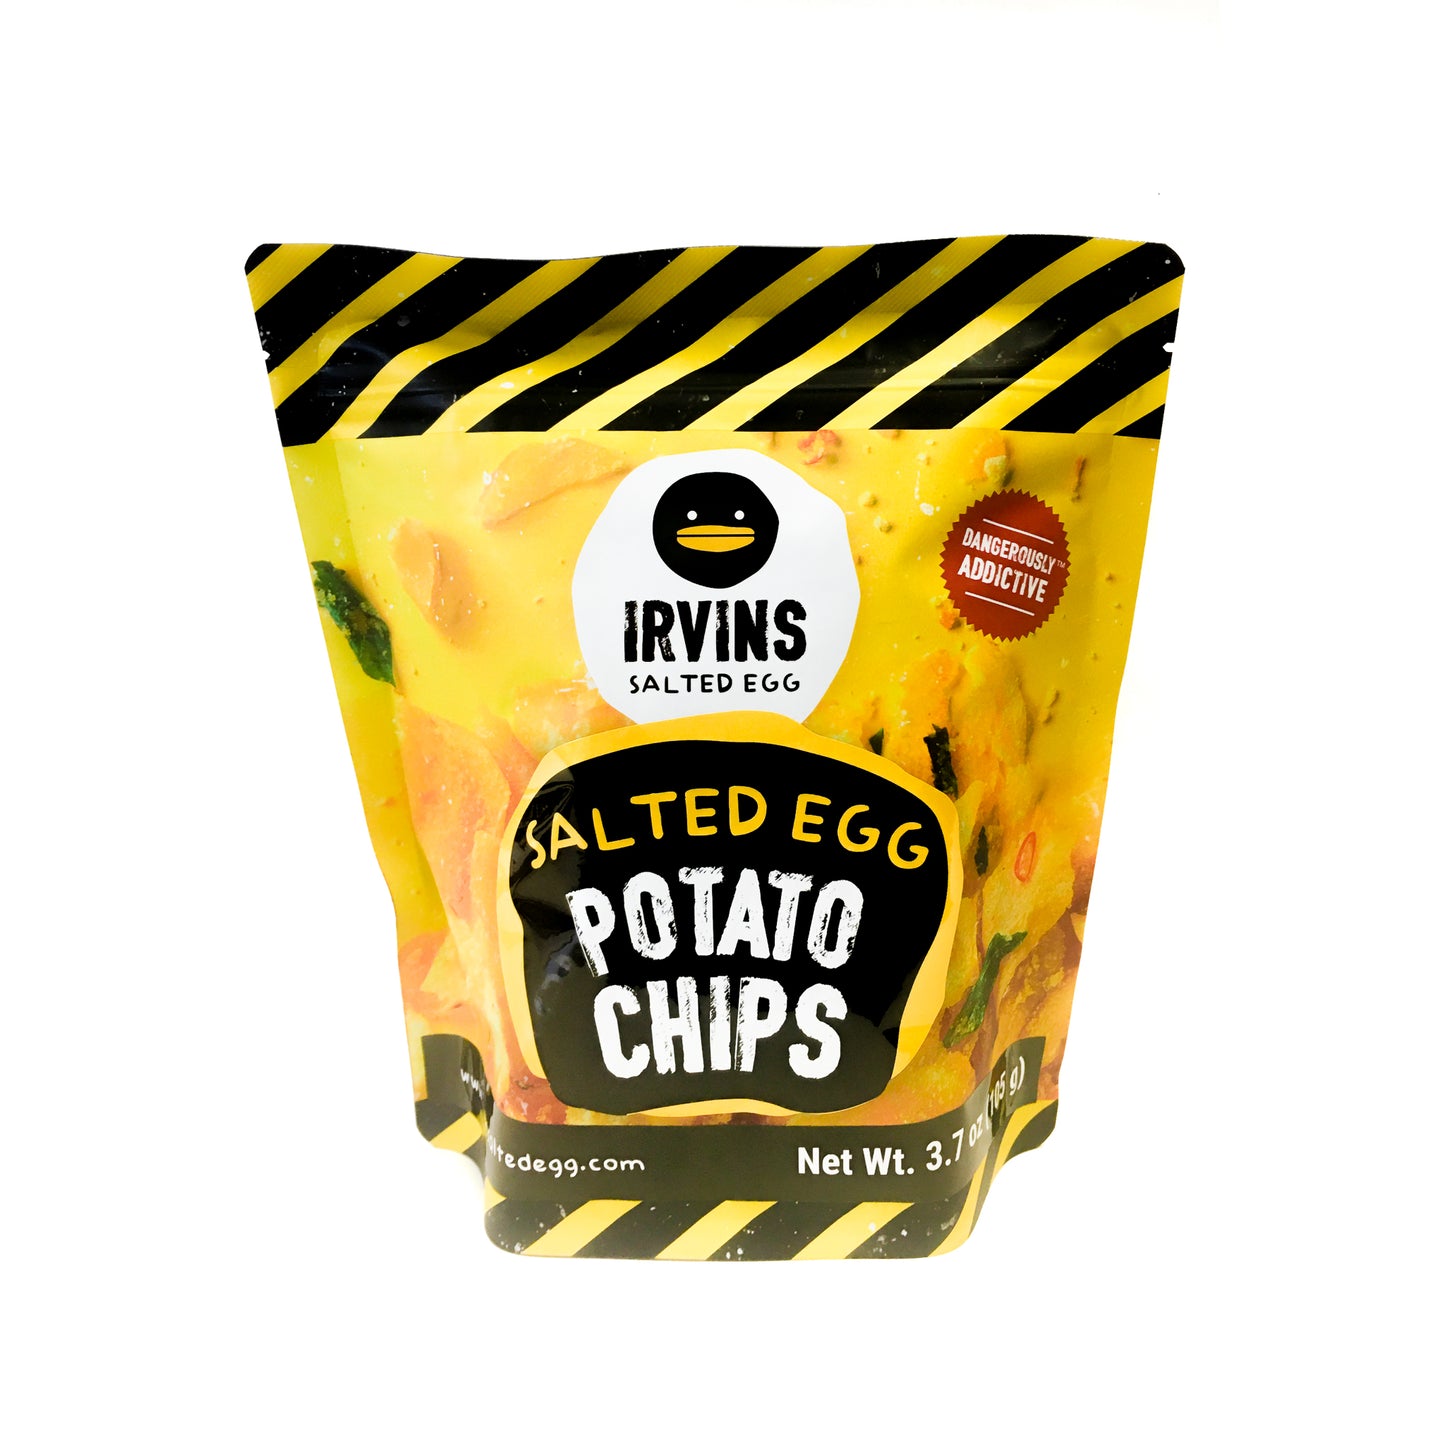 Irvins Salted Egg Potato Chips Small 咸蛋薯片 (2 BAGS/包x 3.7 OZ)